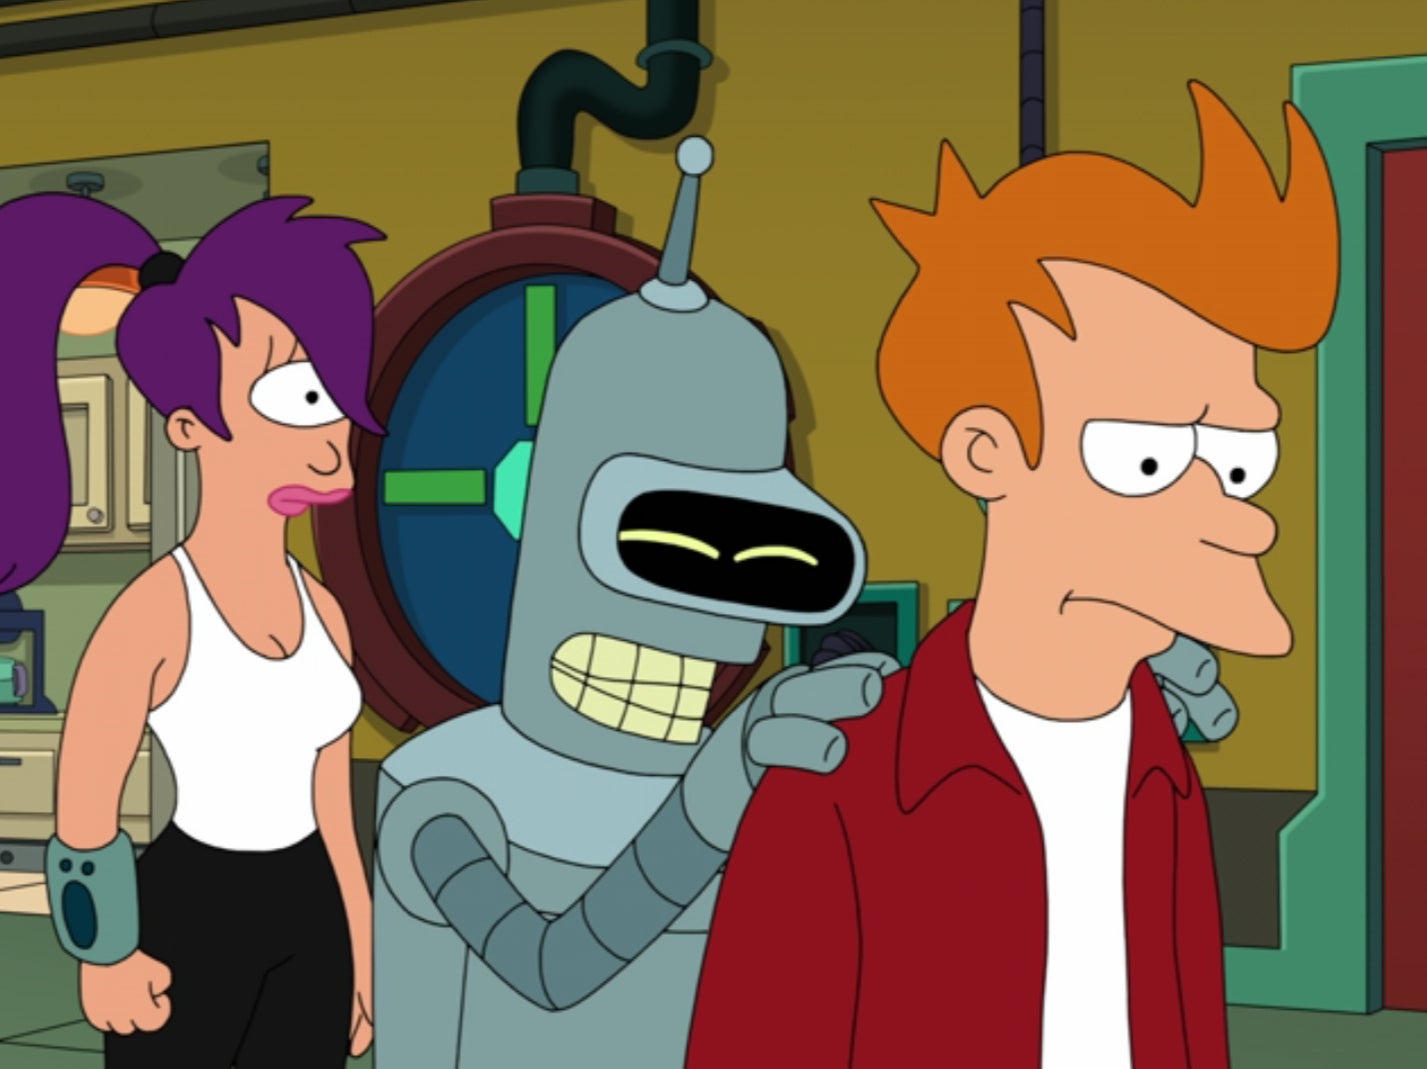 Leela (Katey Sagal), Bender (John DiMaggio) and Fry (Billy West) in the first episode of the new ‘Futurama’ reboot